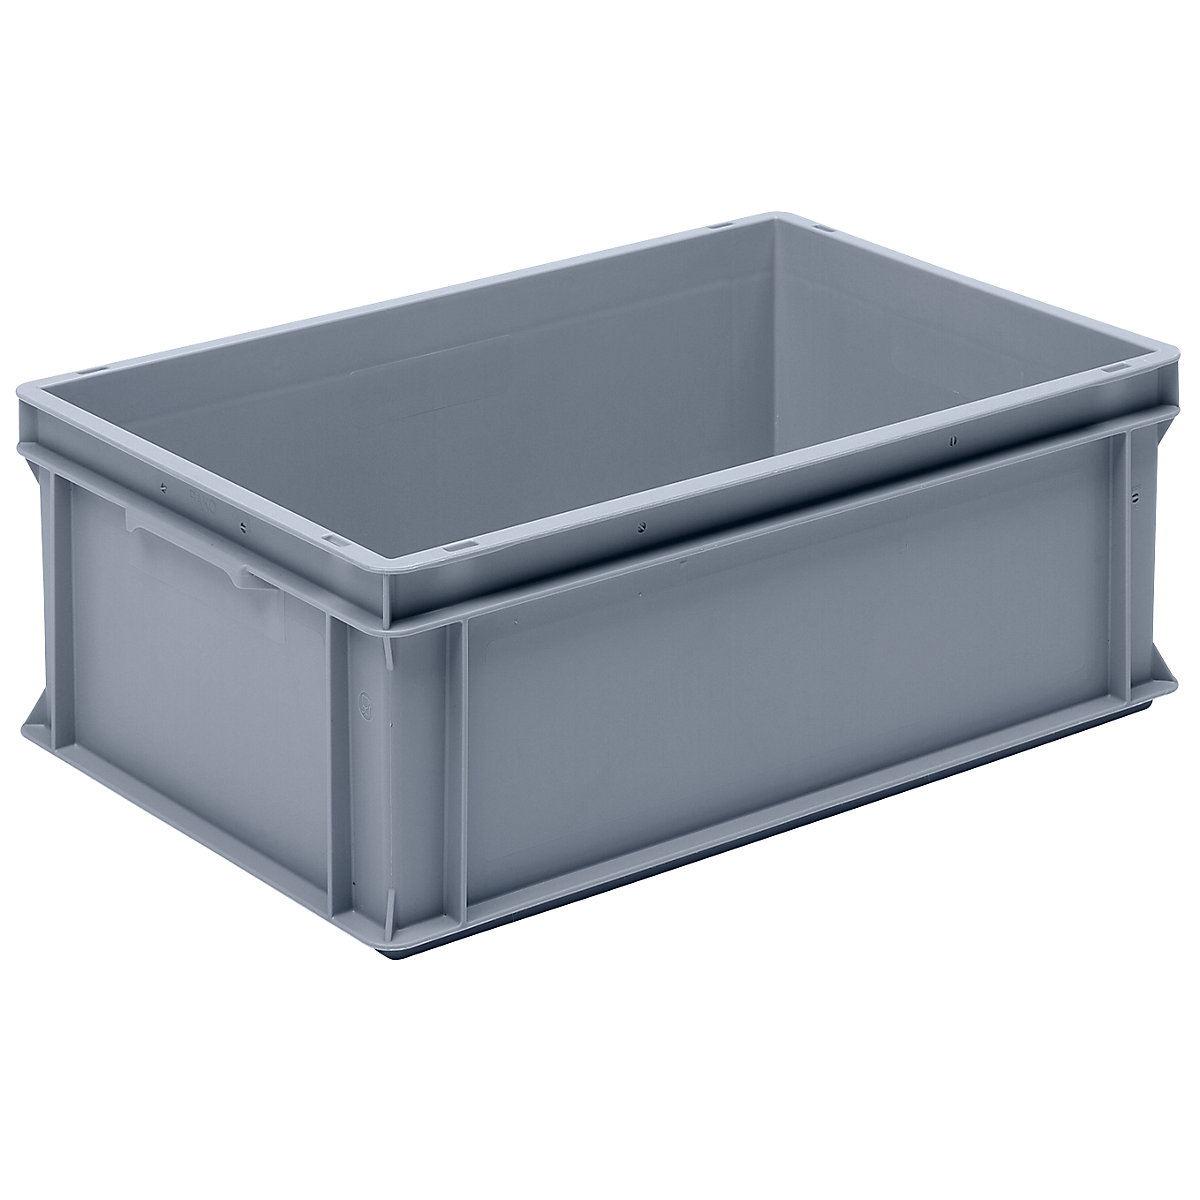 Euro stacking container made of polypropylene (PP), max. load 20 kg, silver grey, capacity 40 l, external height 220 mm, pack of 3